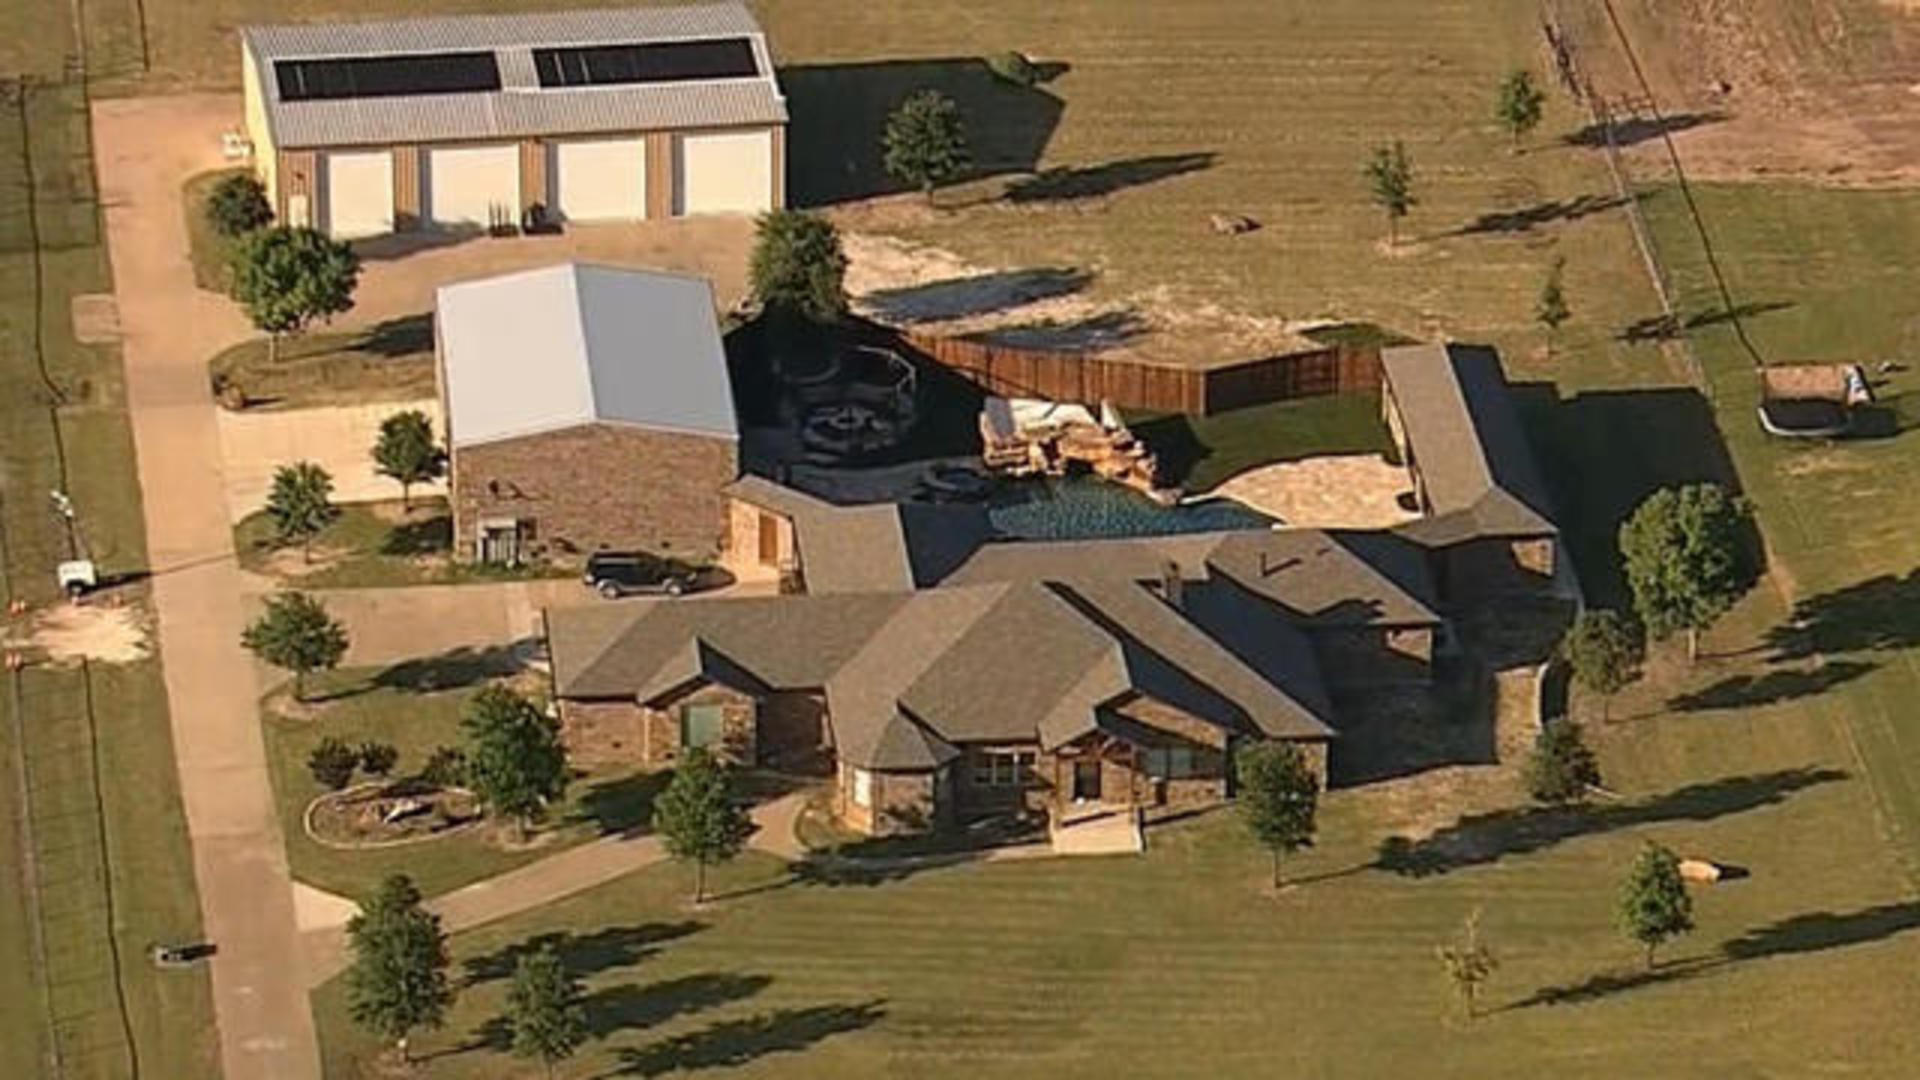 Lawsuit claims Texas home doubles as a swingers club pic